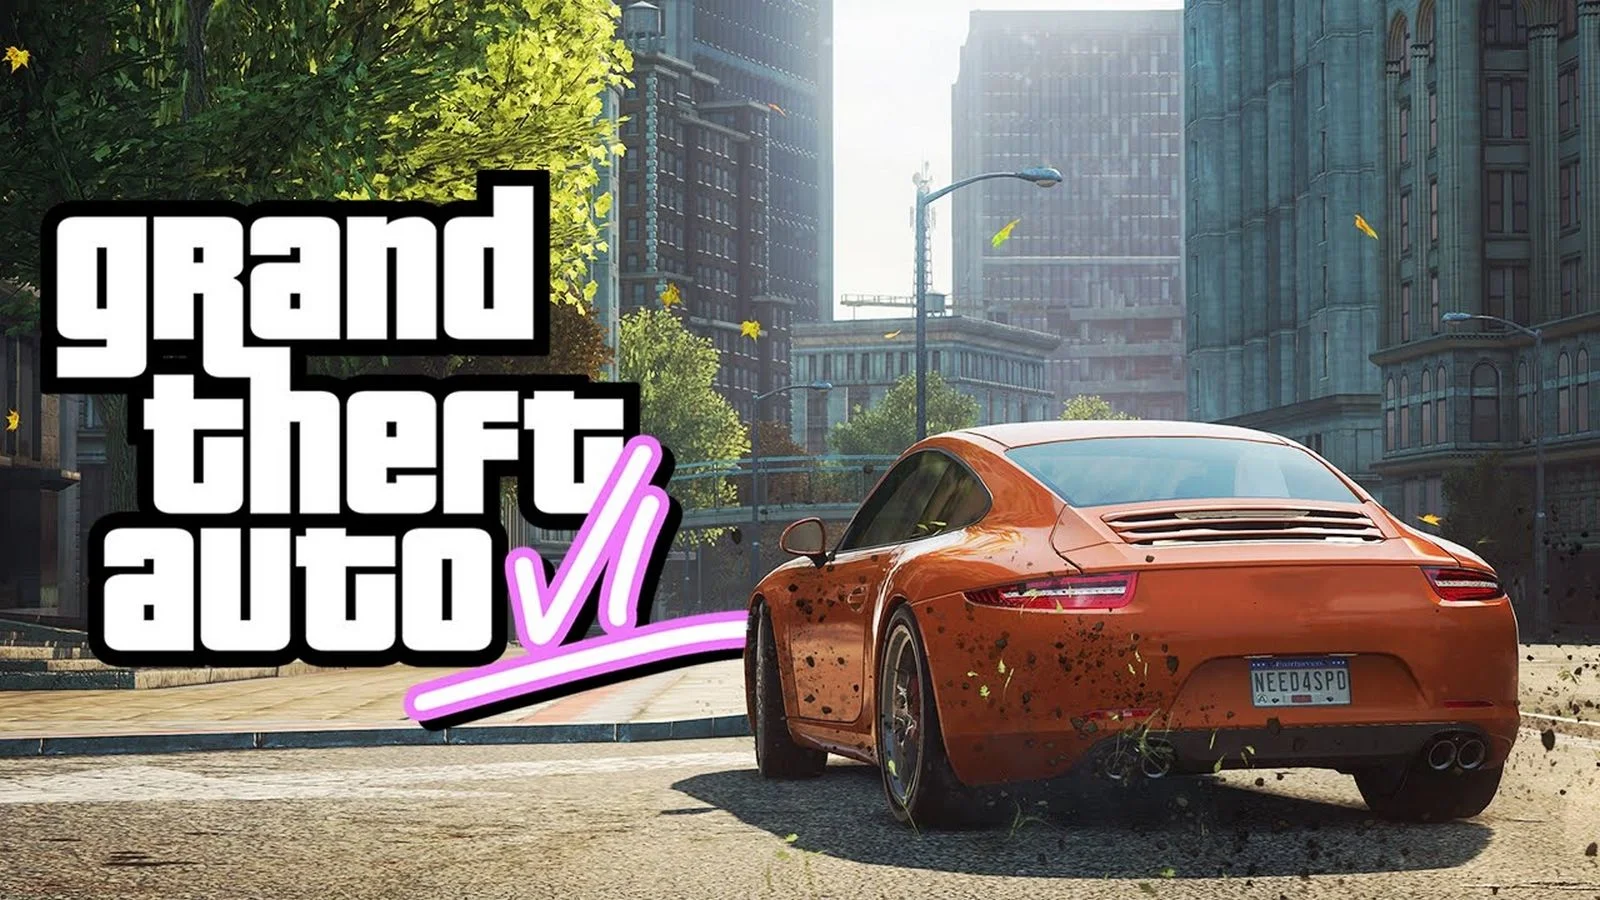 Details about GTA 6 were revealed. They were found in the account of the former developer Rockstar Games